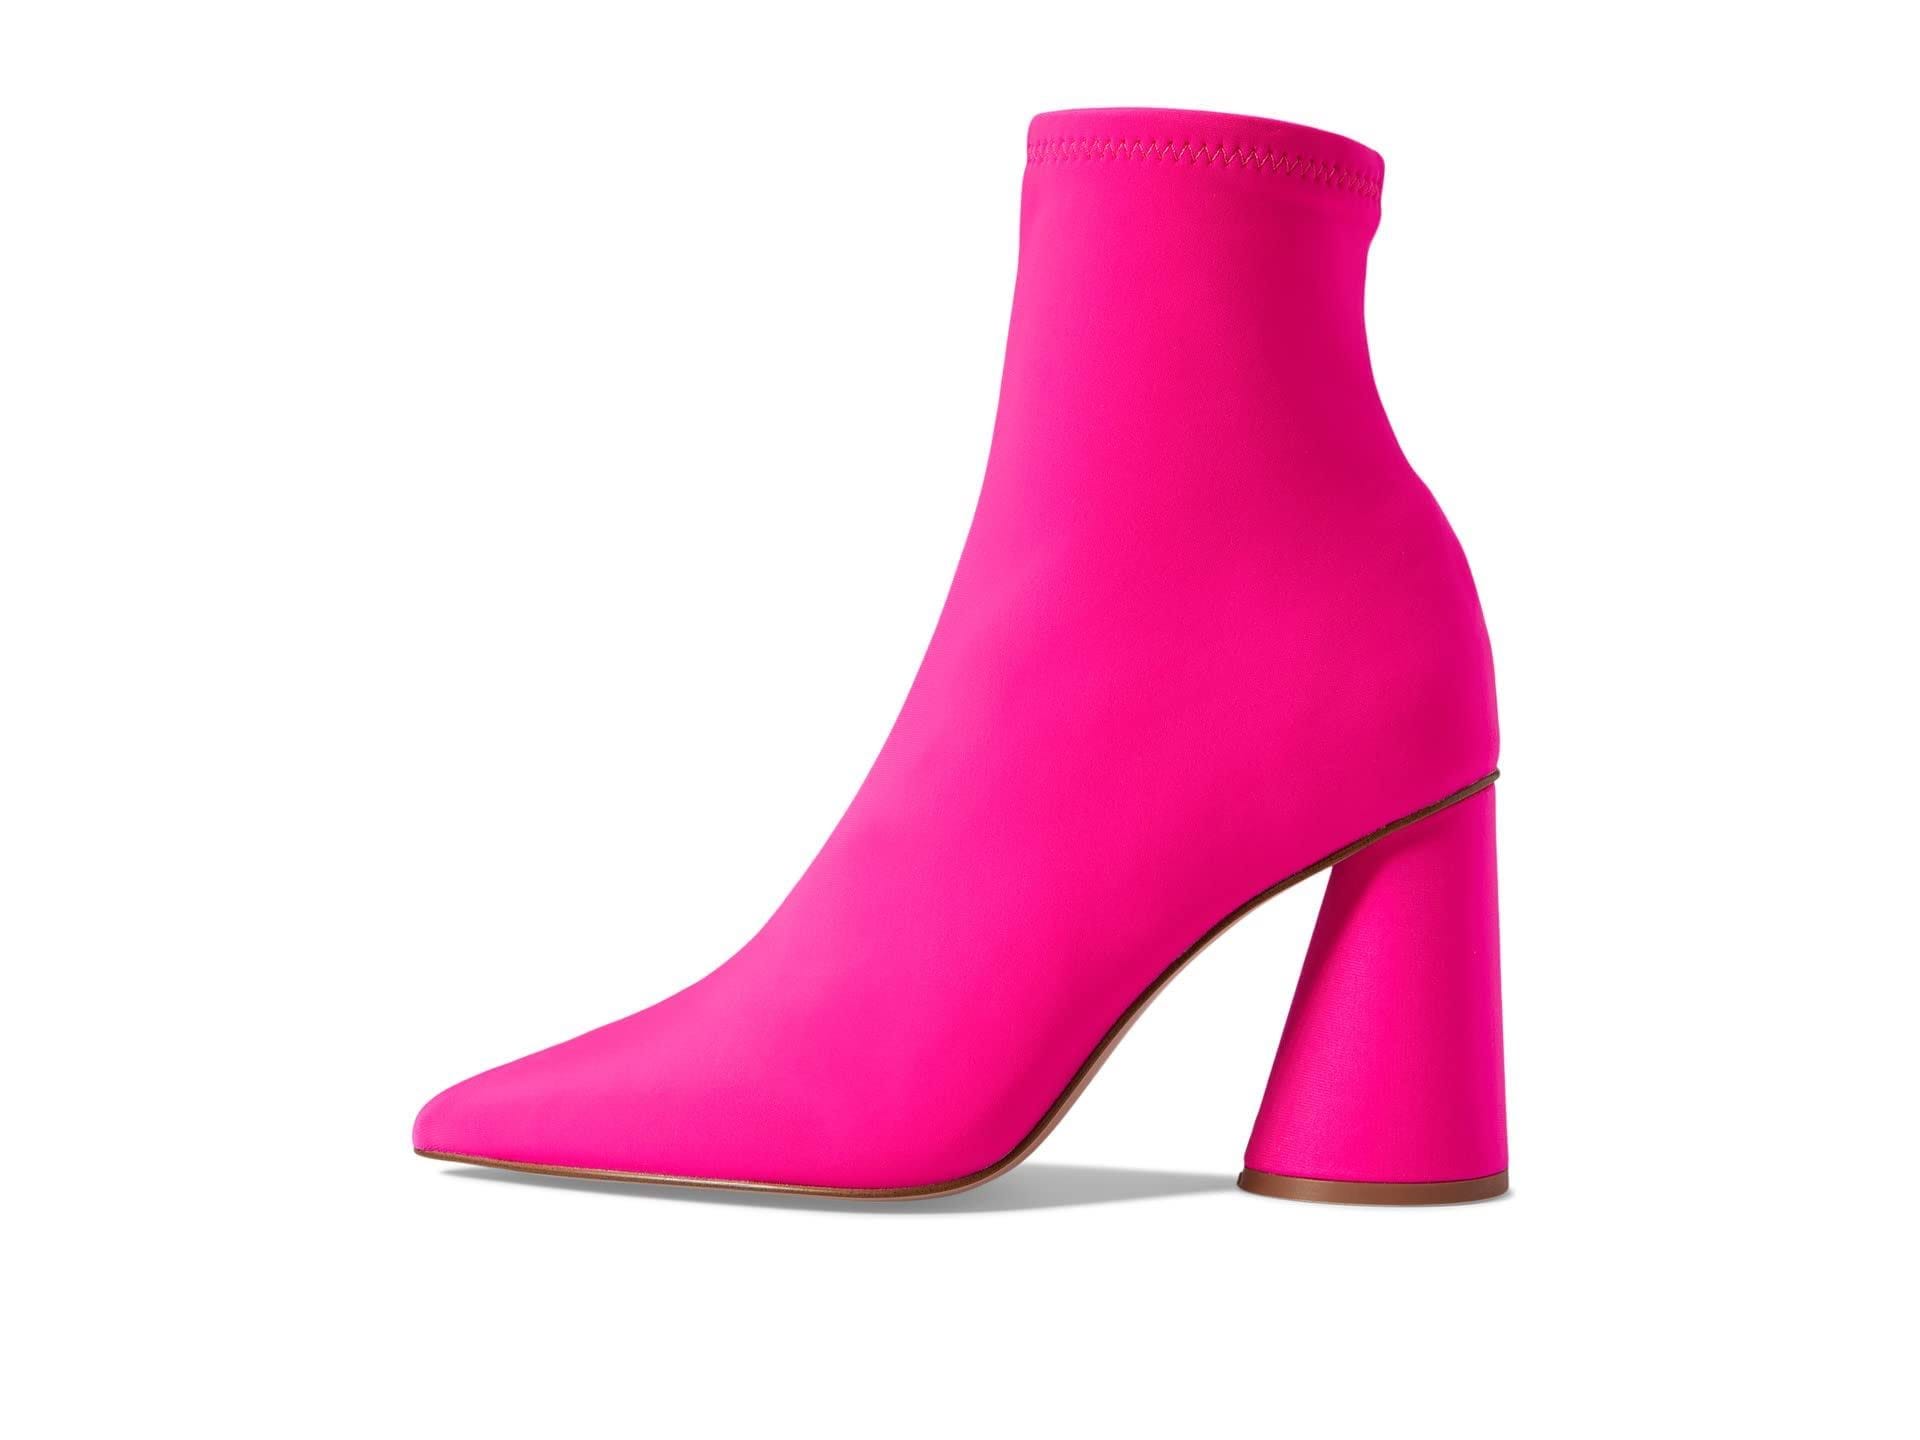 Steve Madden Pink Vallor Bootie with Rubber Sole - Medium Width | Image